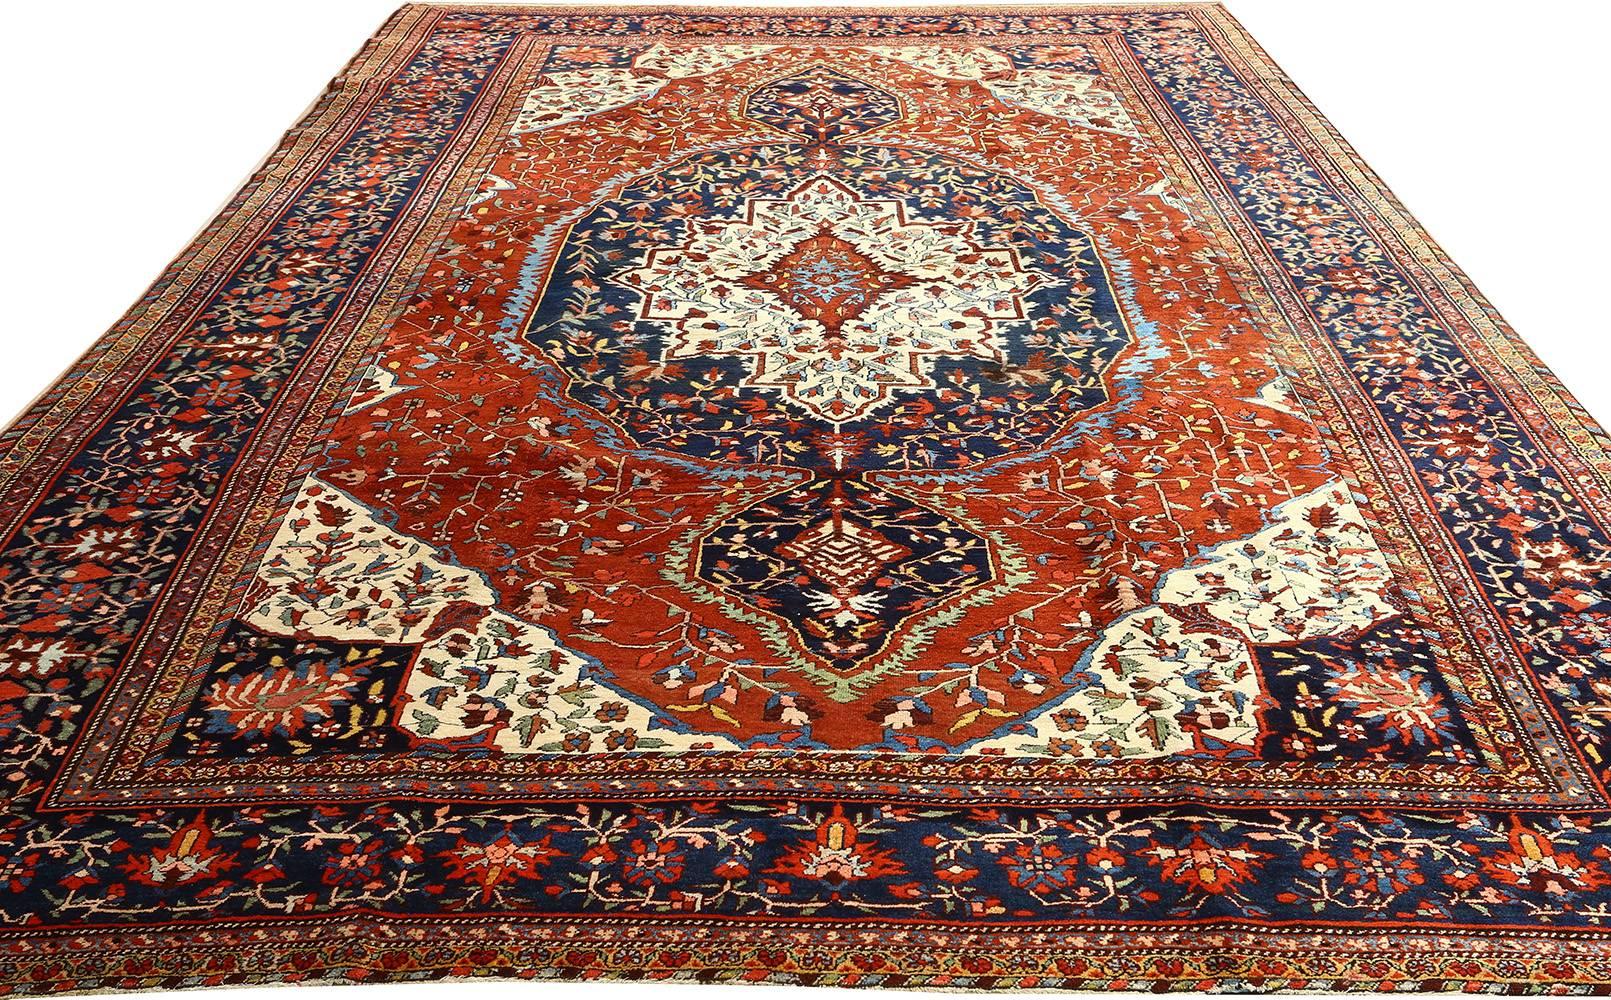 Nazmiyal Collection Antique Sarouk Farahan Persian Rug. 9 ft 2 in x 12 ft 2 in  3